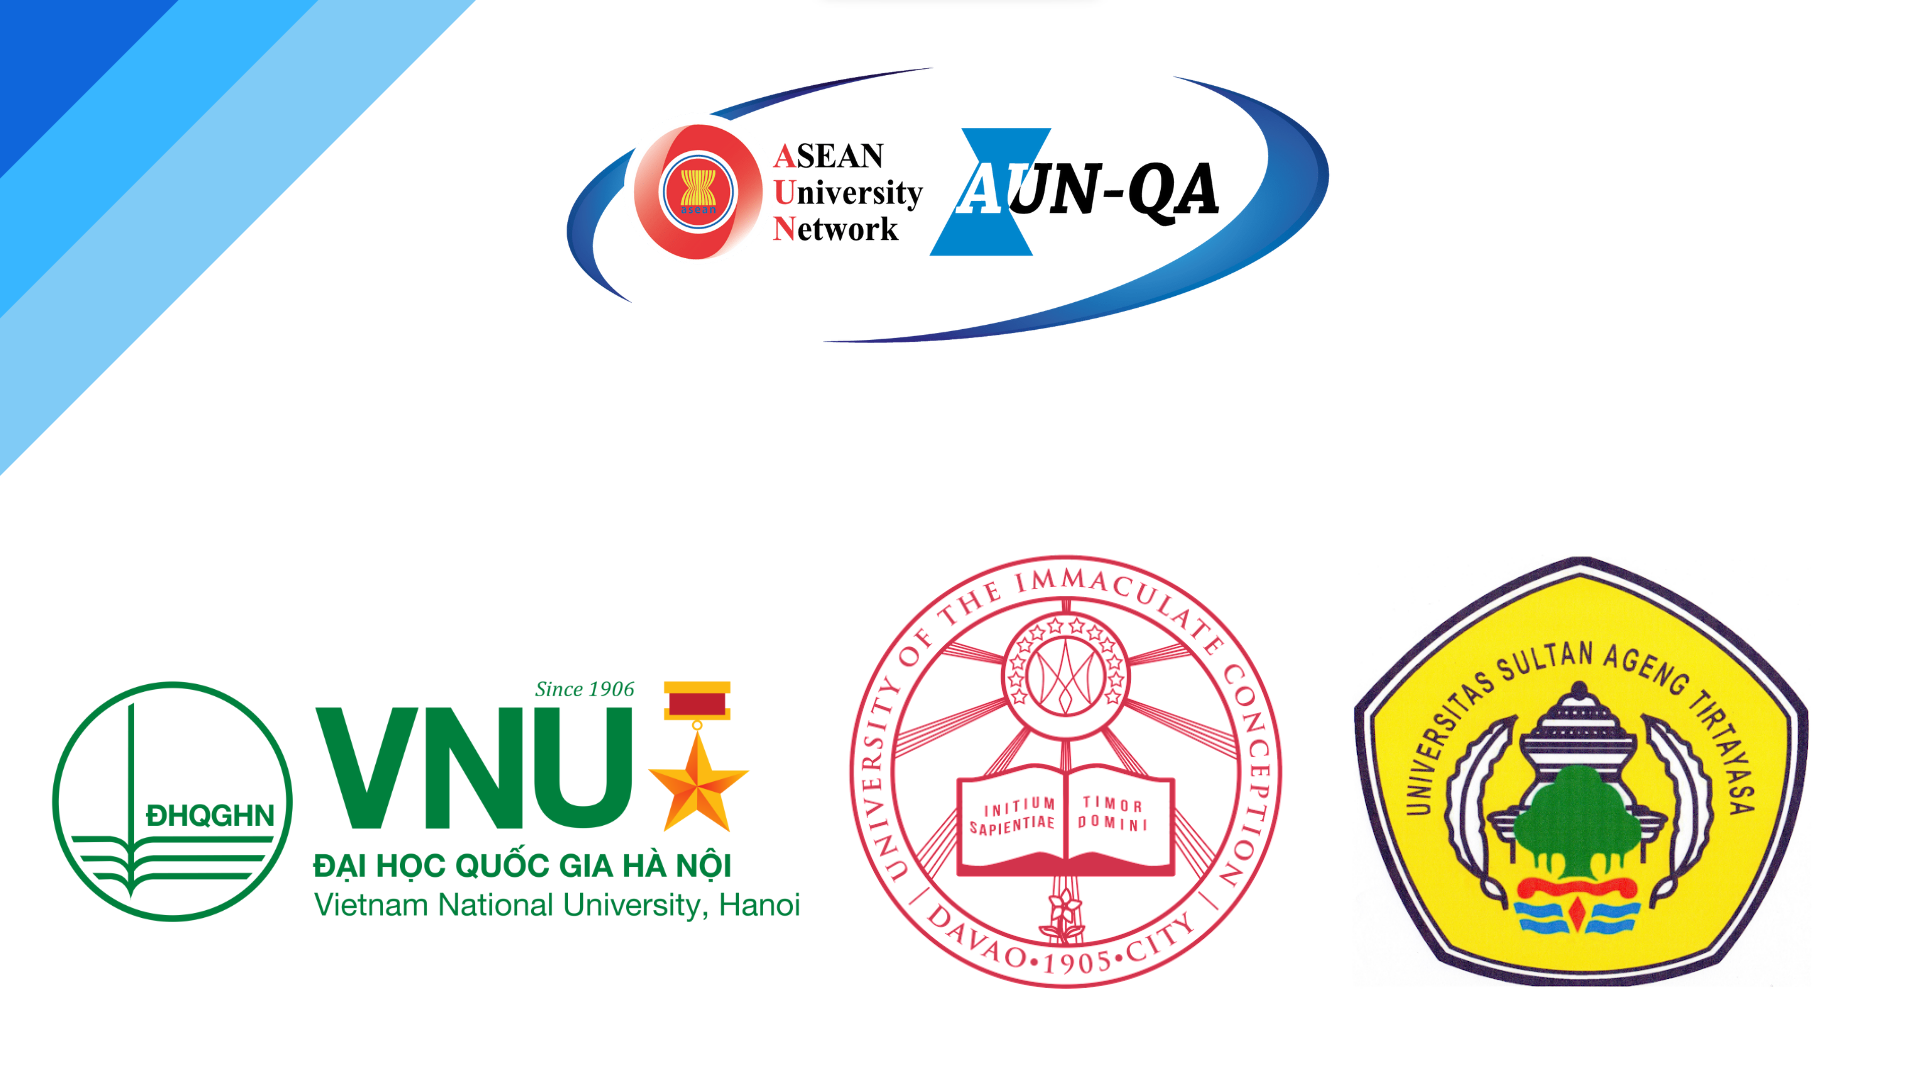 AUN-QA Overview: Marching on with the 322nd, 323rd, & 313th AUN-QA Programme Assessments